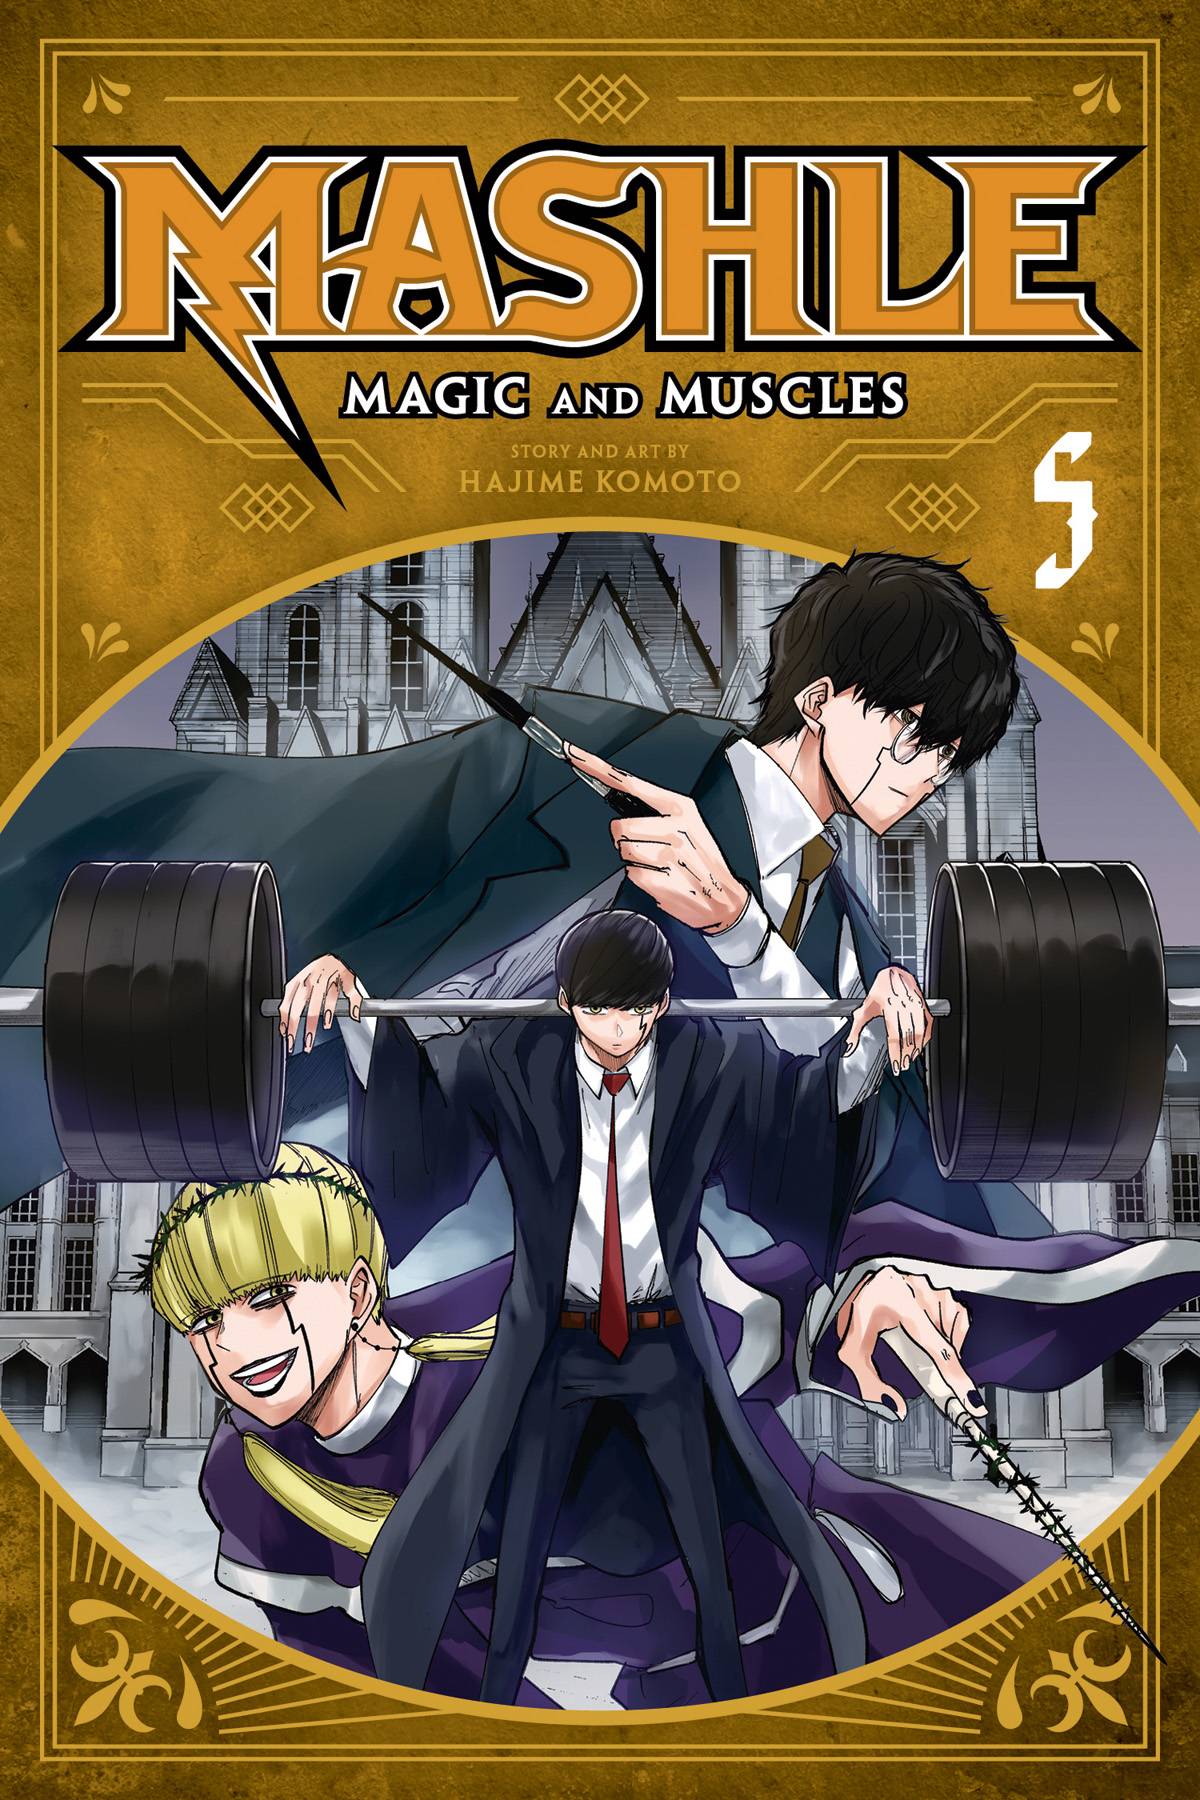 Mash Collects Another Spine  MASHLE: MAGIC AND MUSCLES 